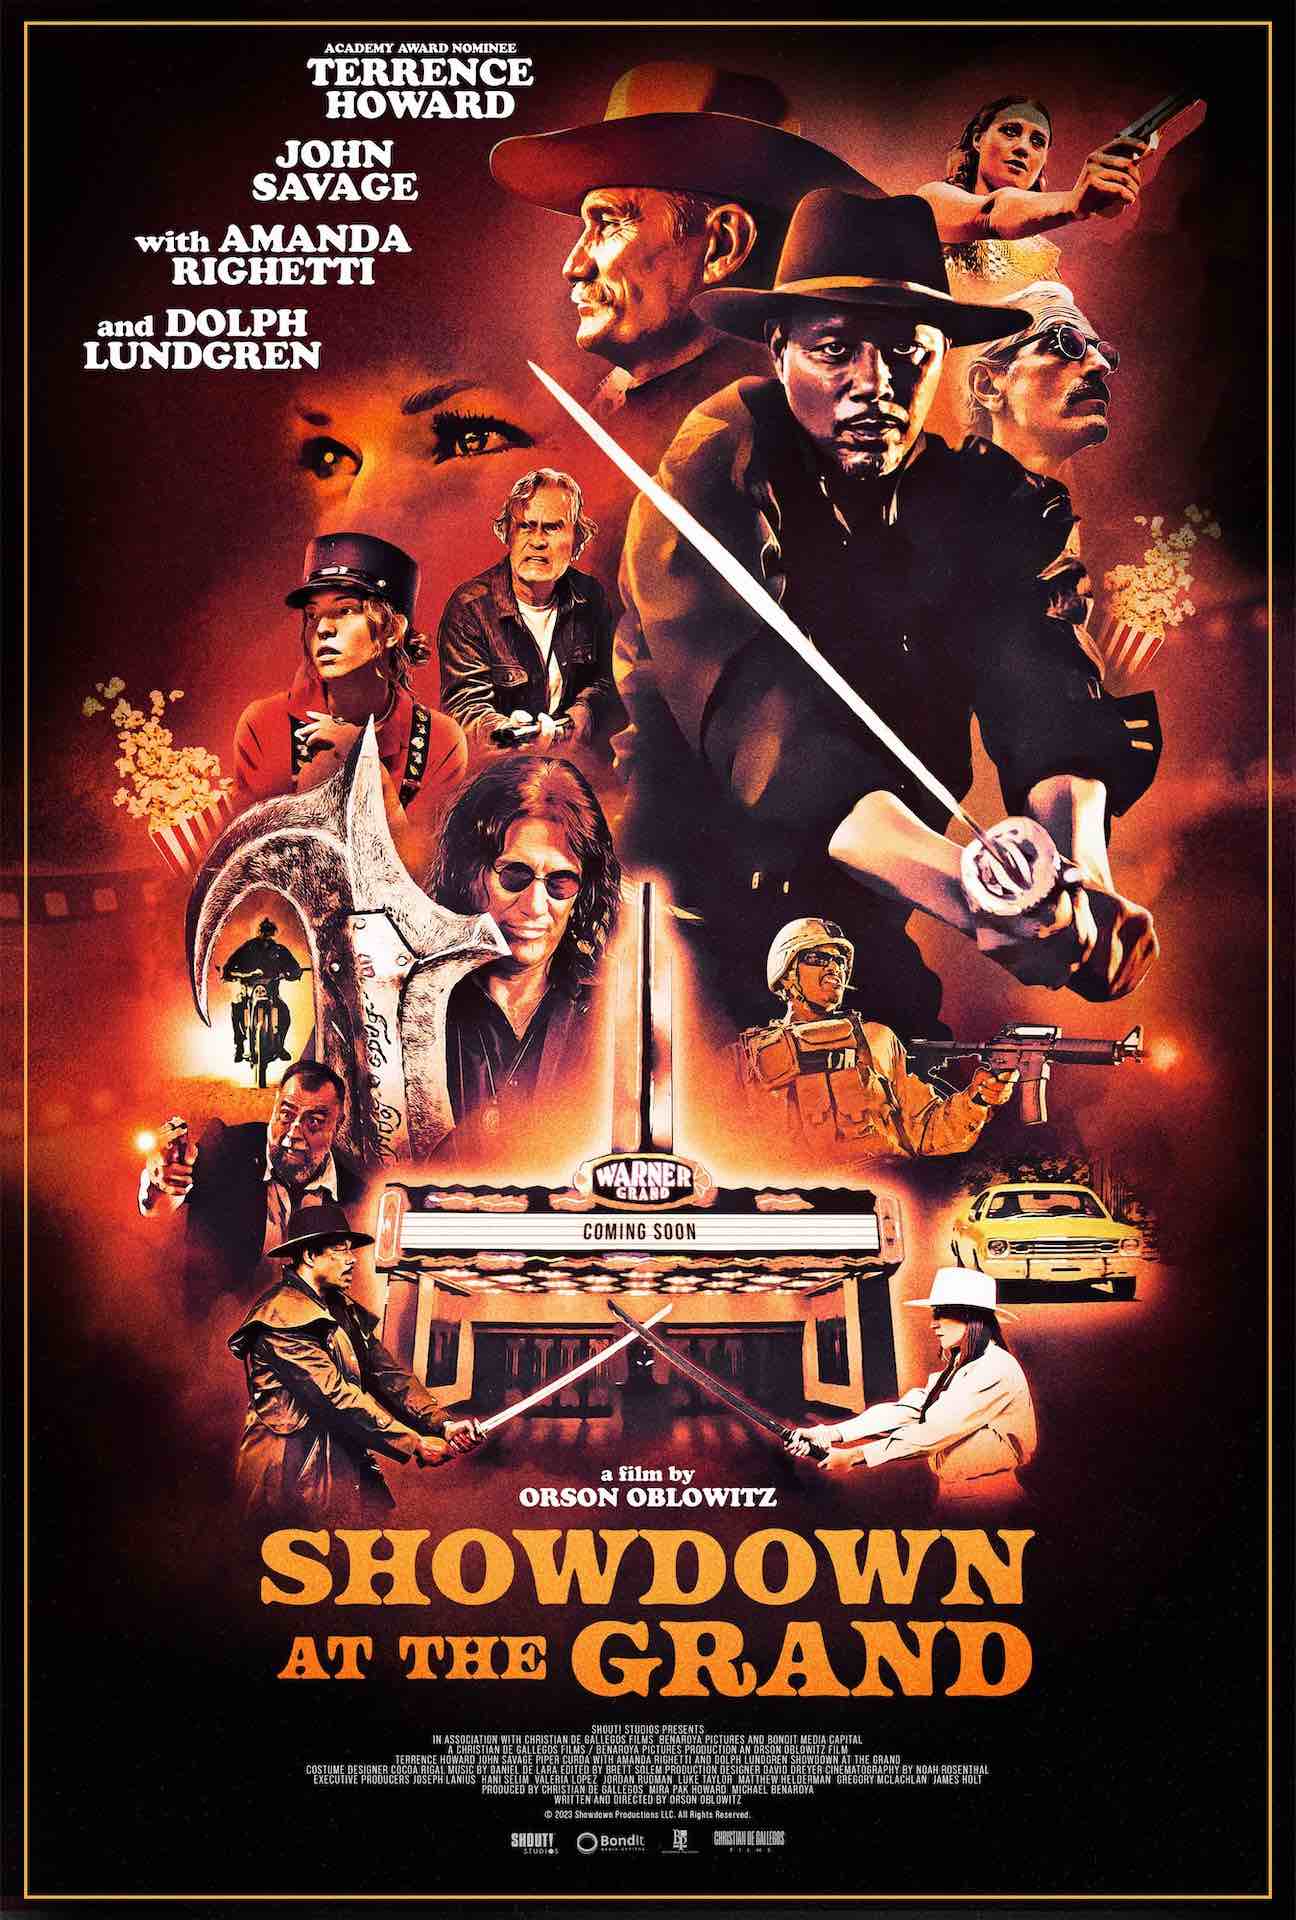 THEATRICAL POSTER FOR SHOWDOWN AT THE GRAND.